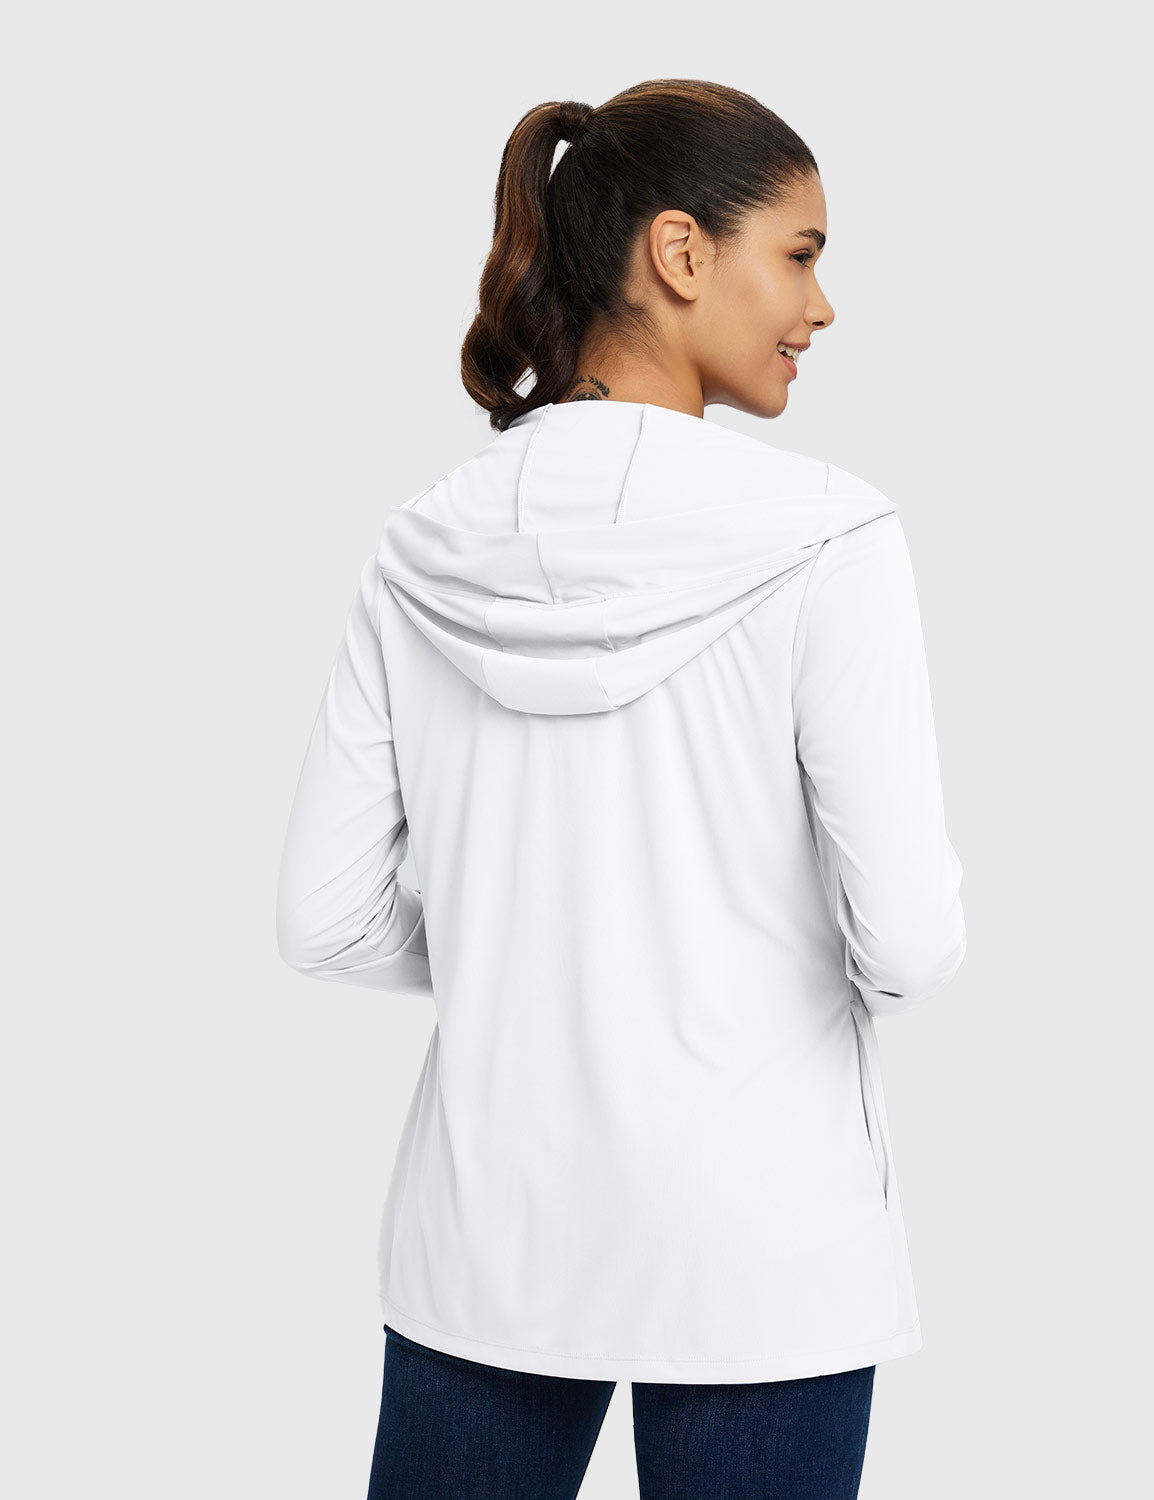 Baleaf Women's Quick-dry Sun-protective Hooded Jacket Lucent White Back